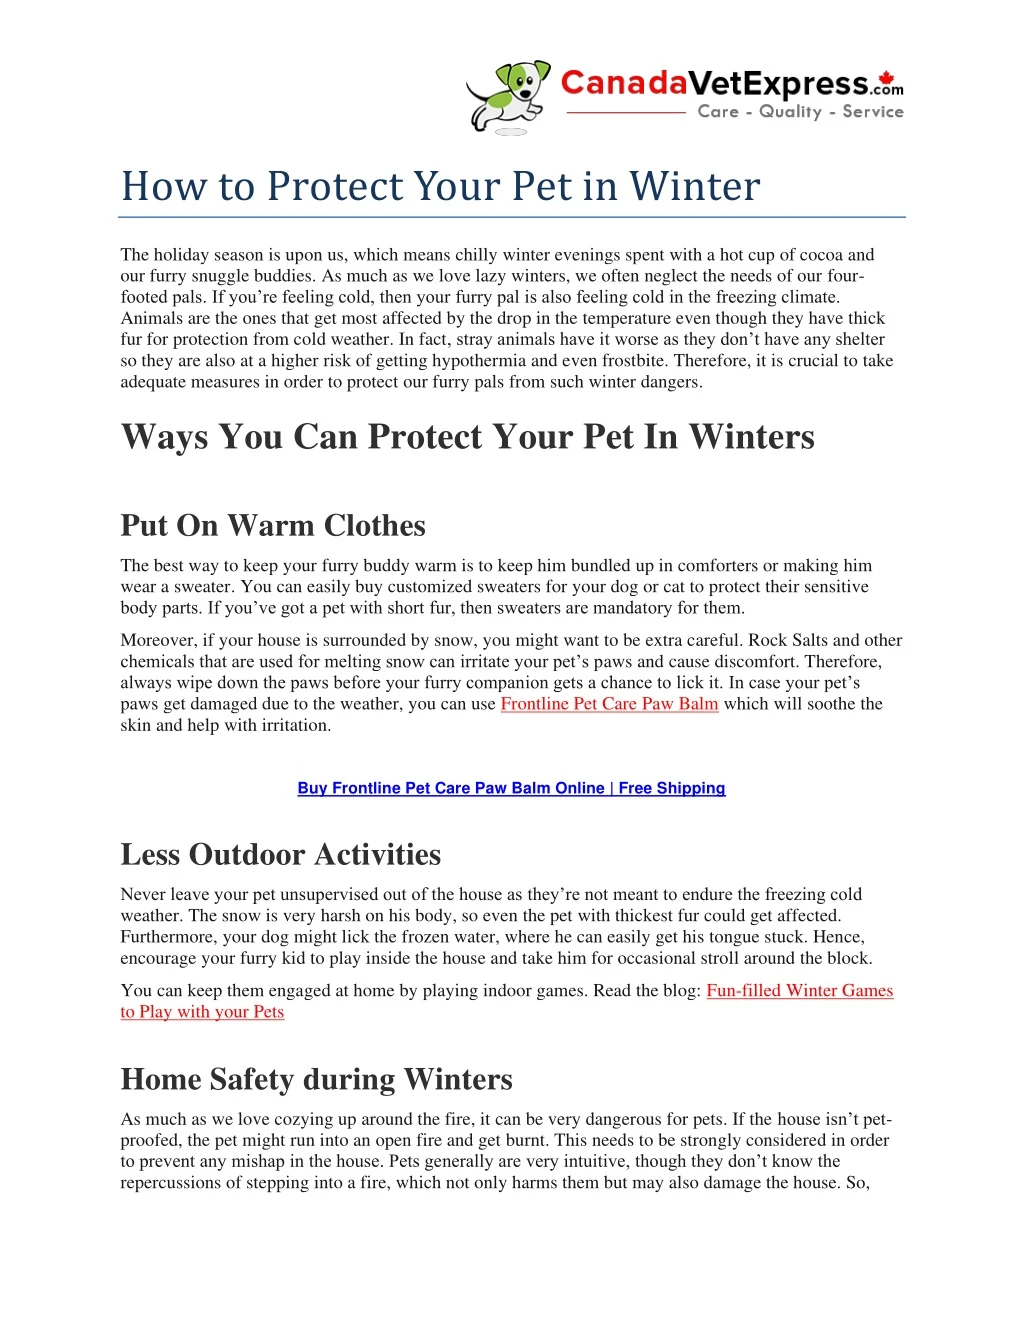 how to protect your pet in winter